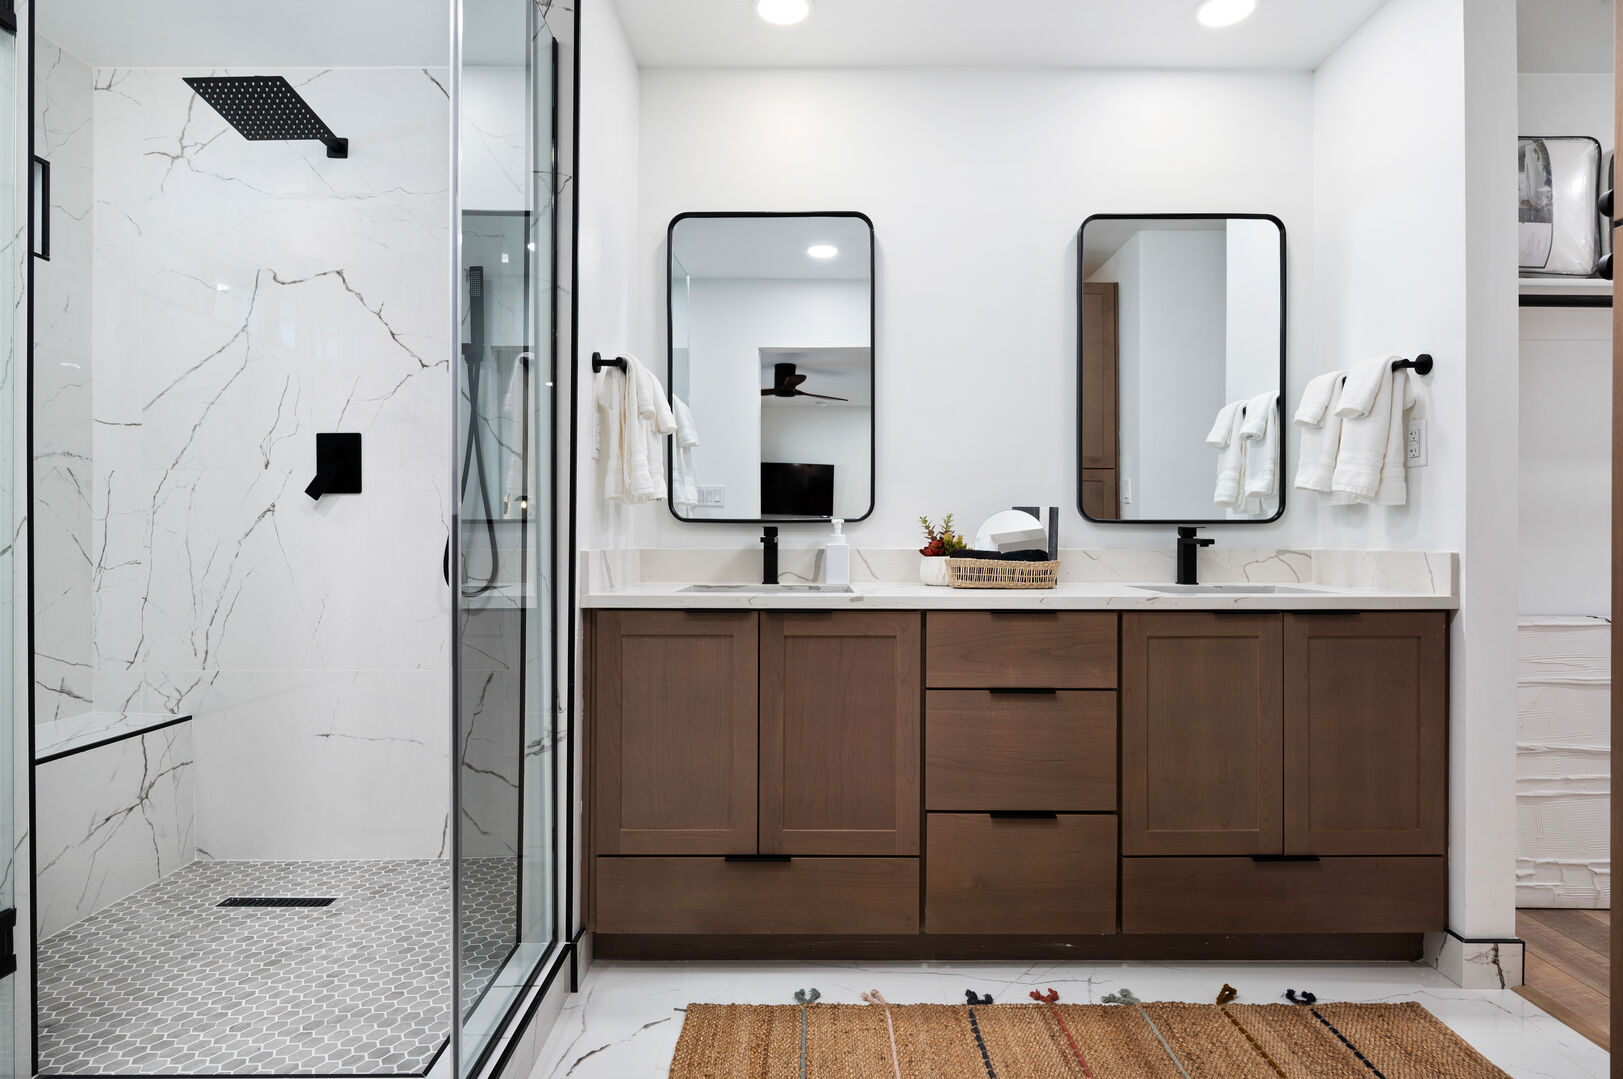 We love this walk in shower with seating. Double vanity sinks.